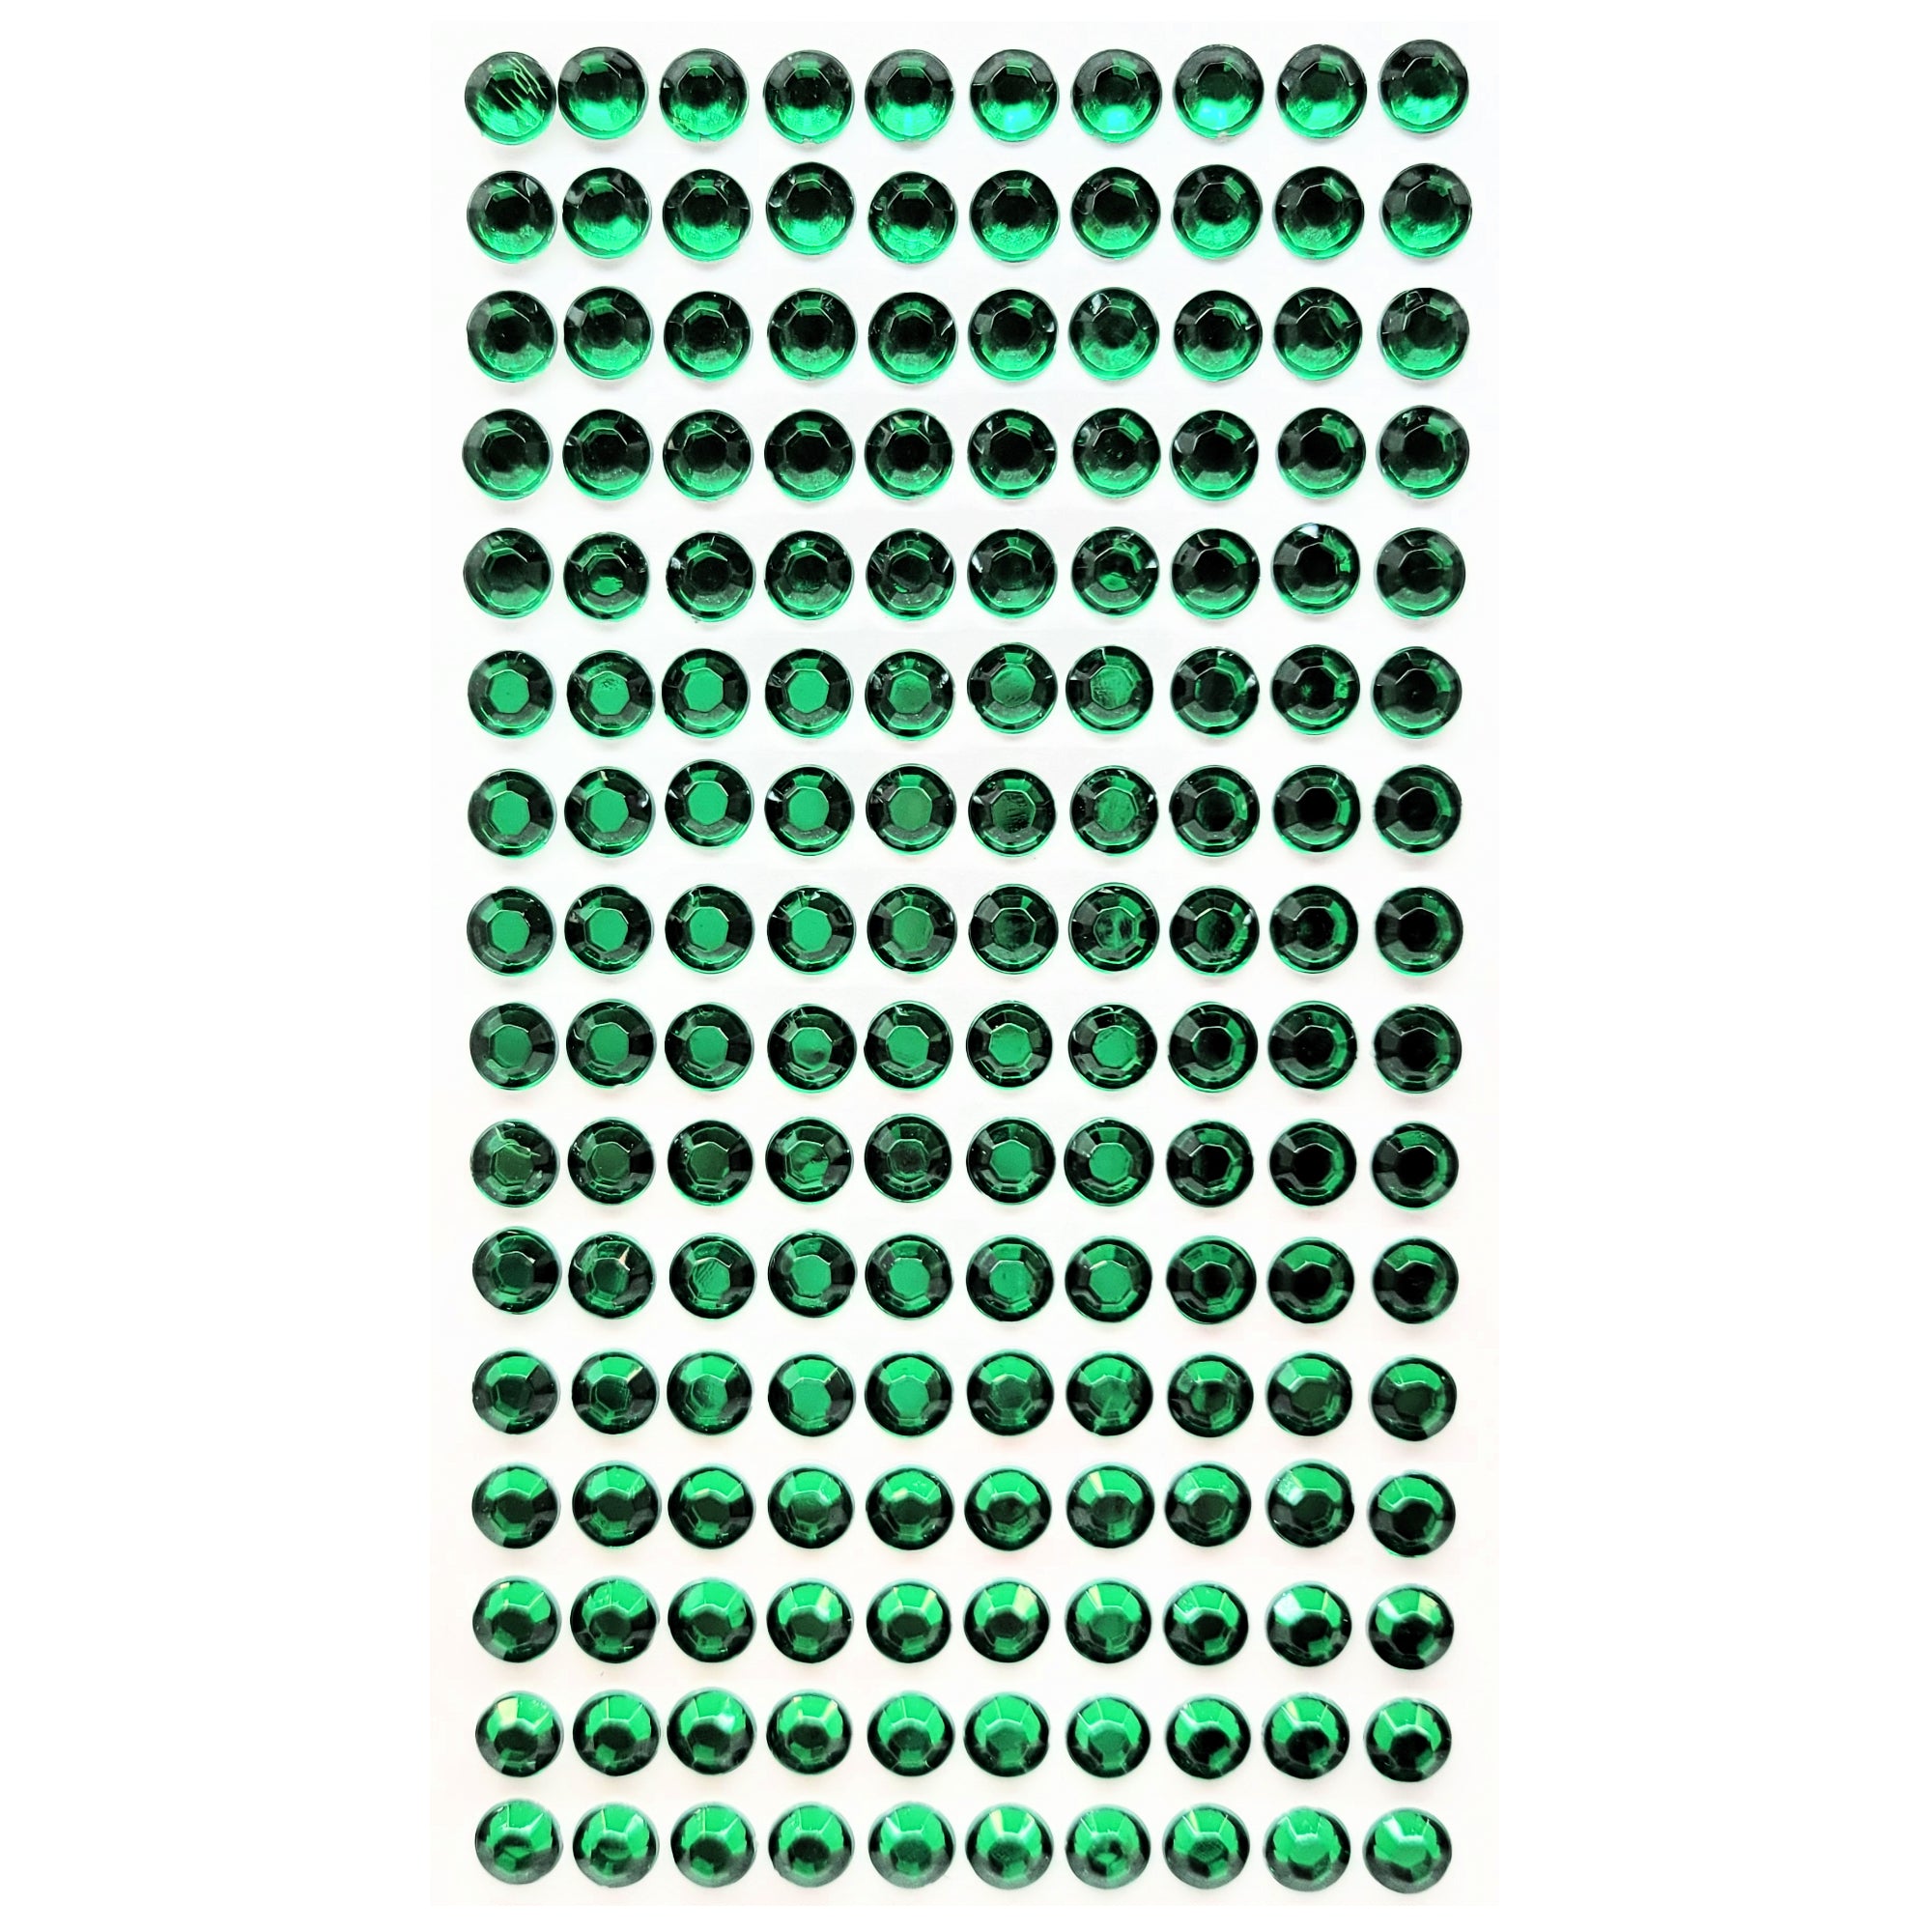 Basically Bling Collection 6mm Christmas Green Gem Scrapbook Embellishments by SSC Designs - 160 Pieces